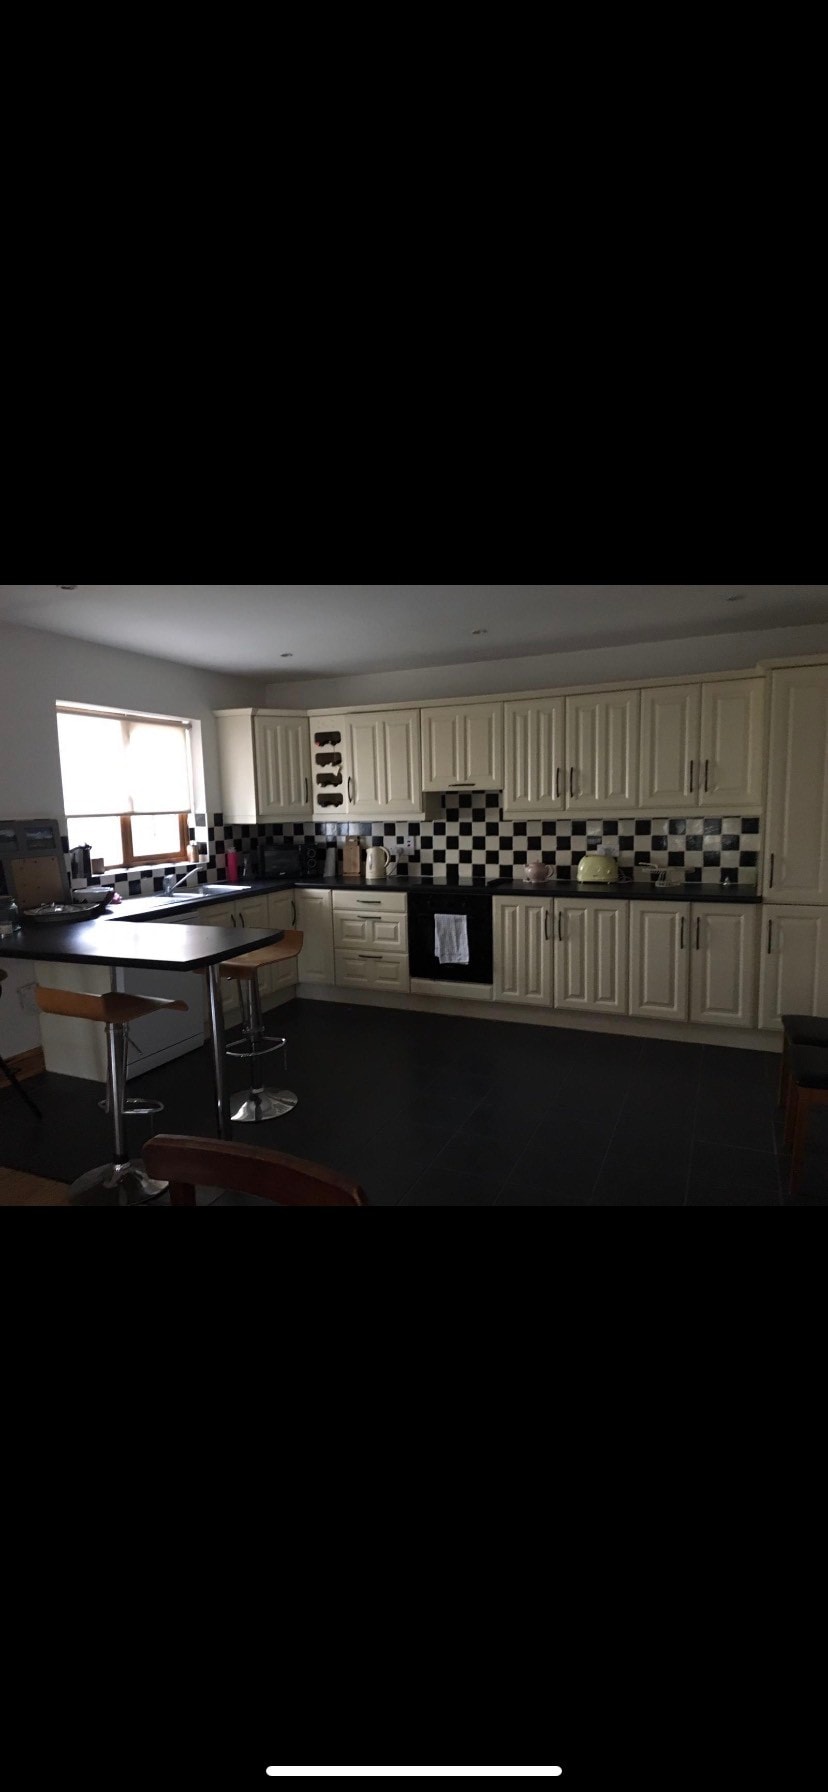 3 Bedroom home(2 Double Beds,2 Single Beds)